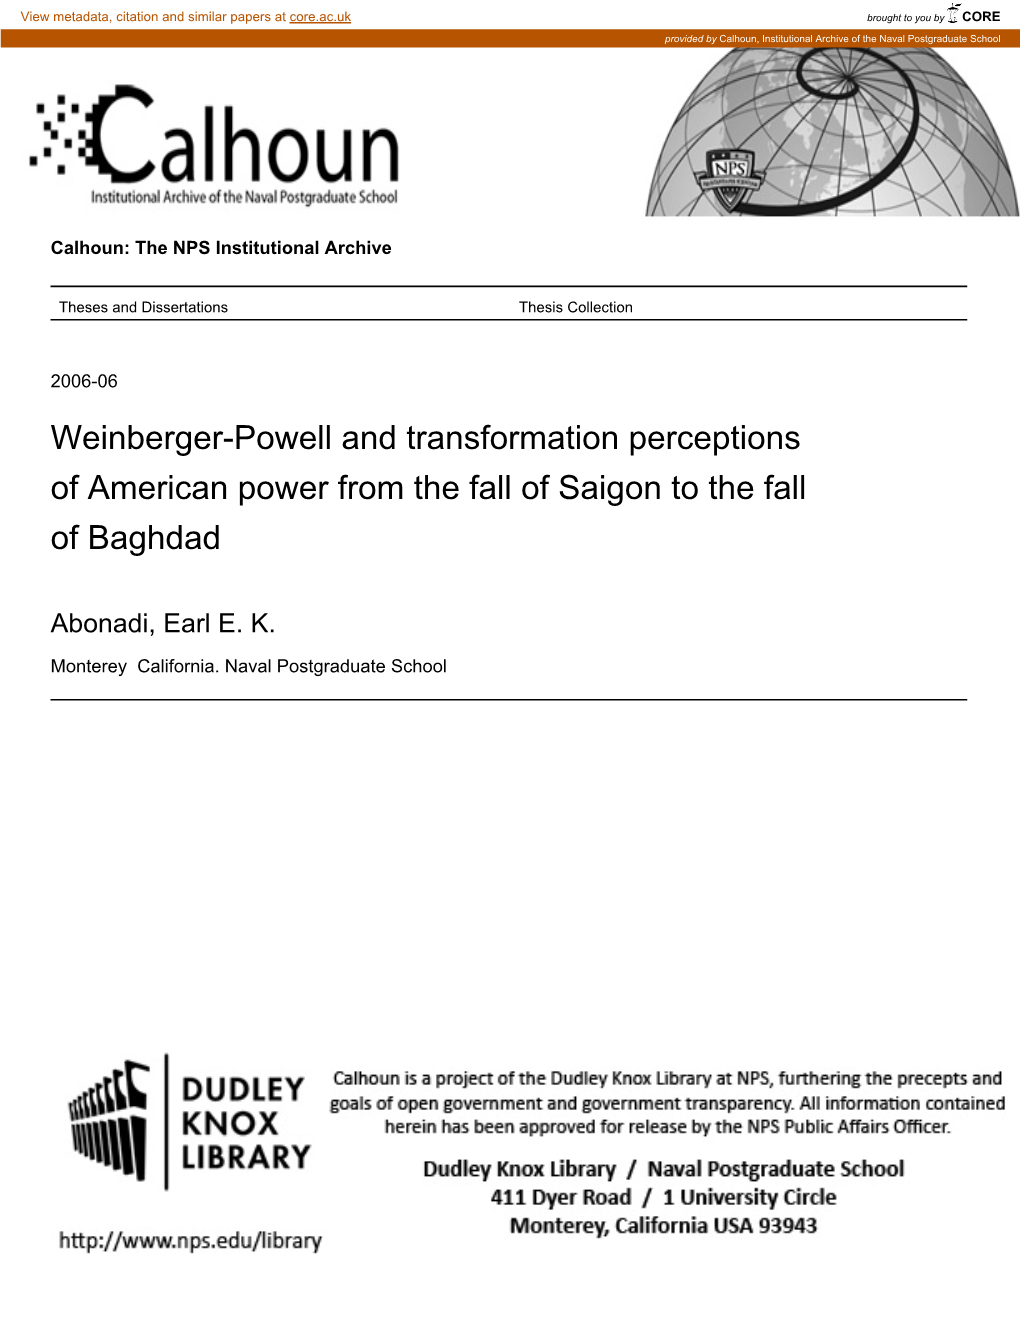 Weinberger-Powell and Transformation Perceptions of American Power from the Fall of Saigon to the Fall of Baghdad